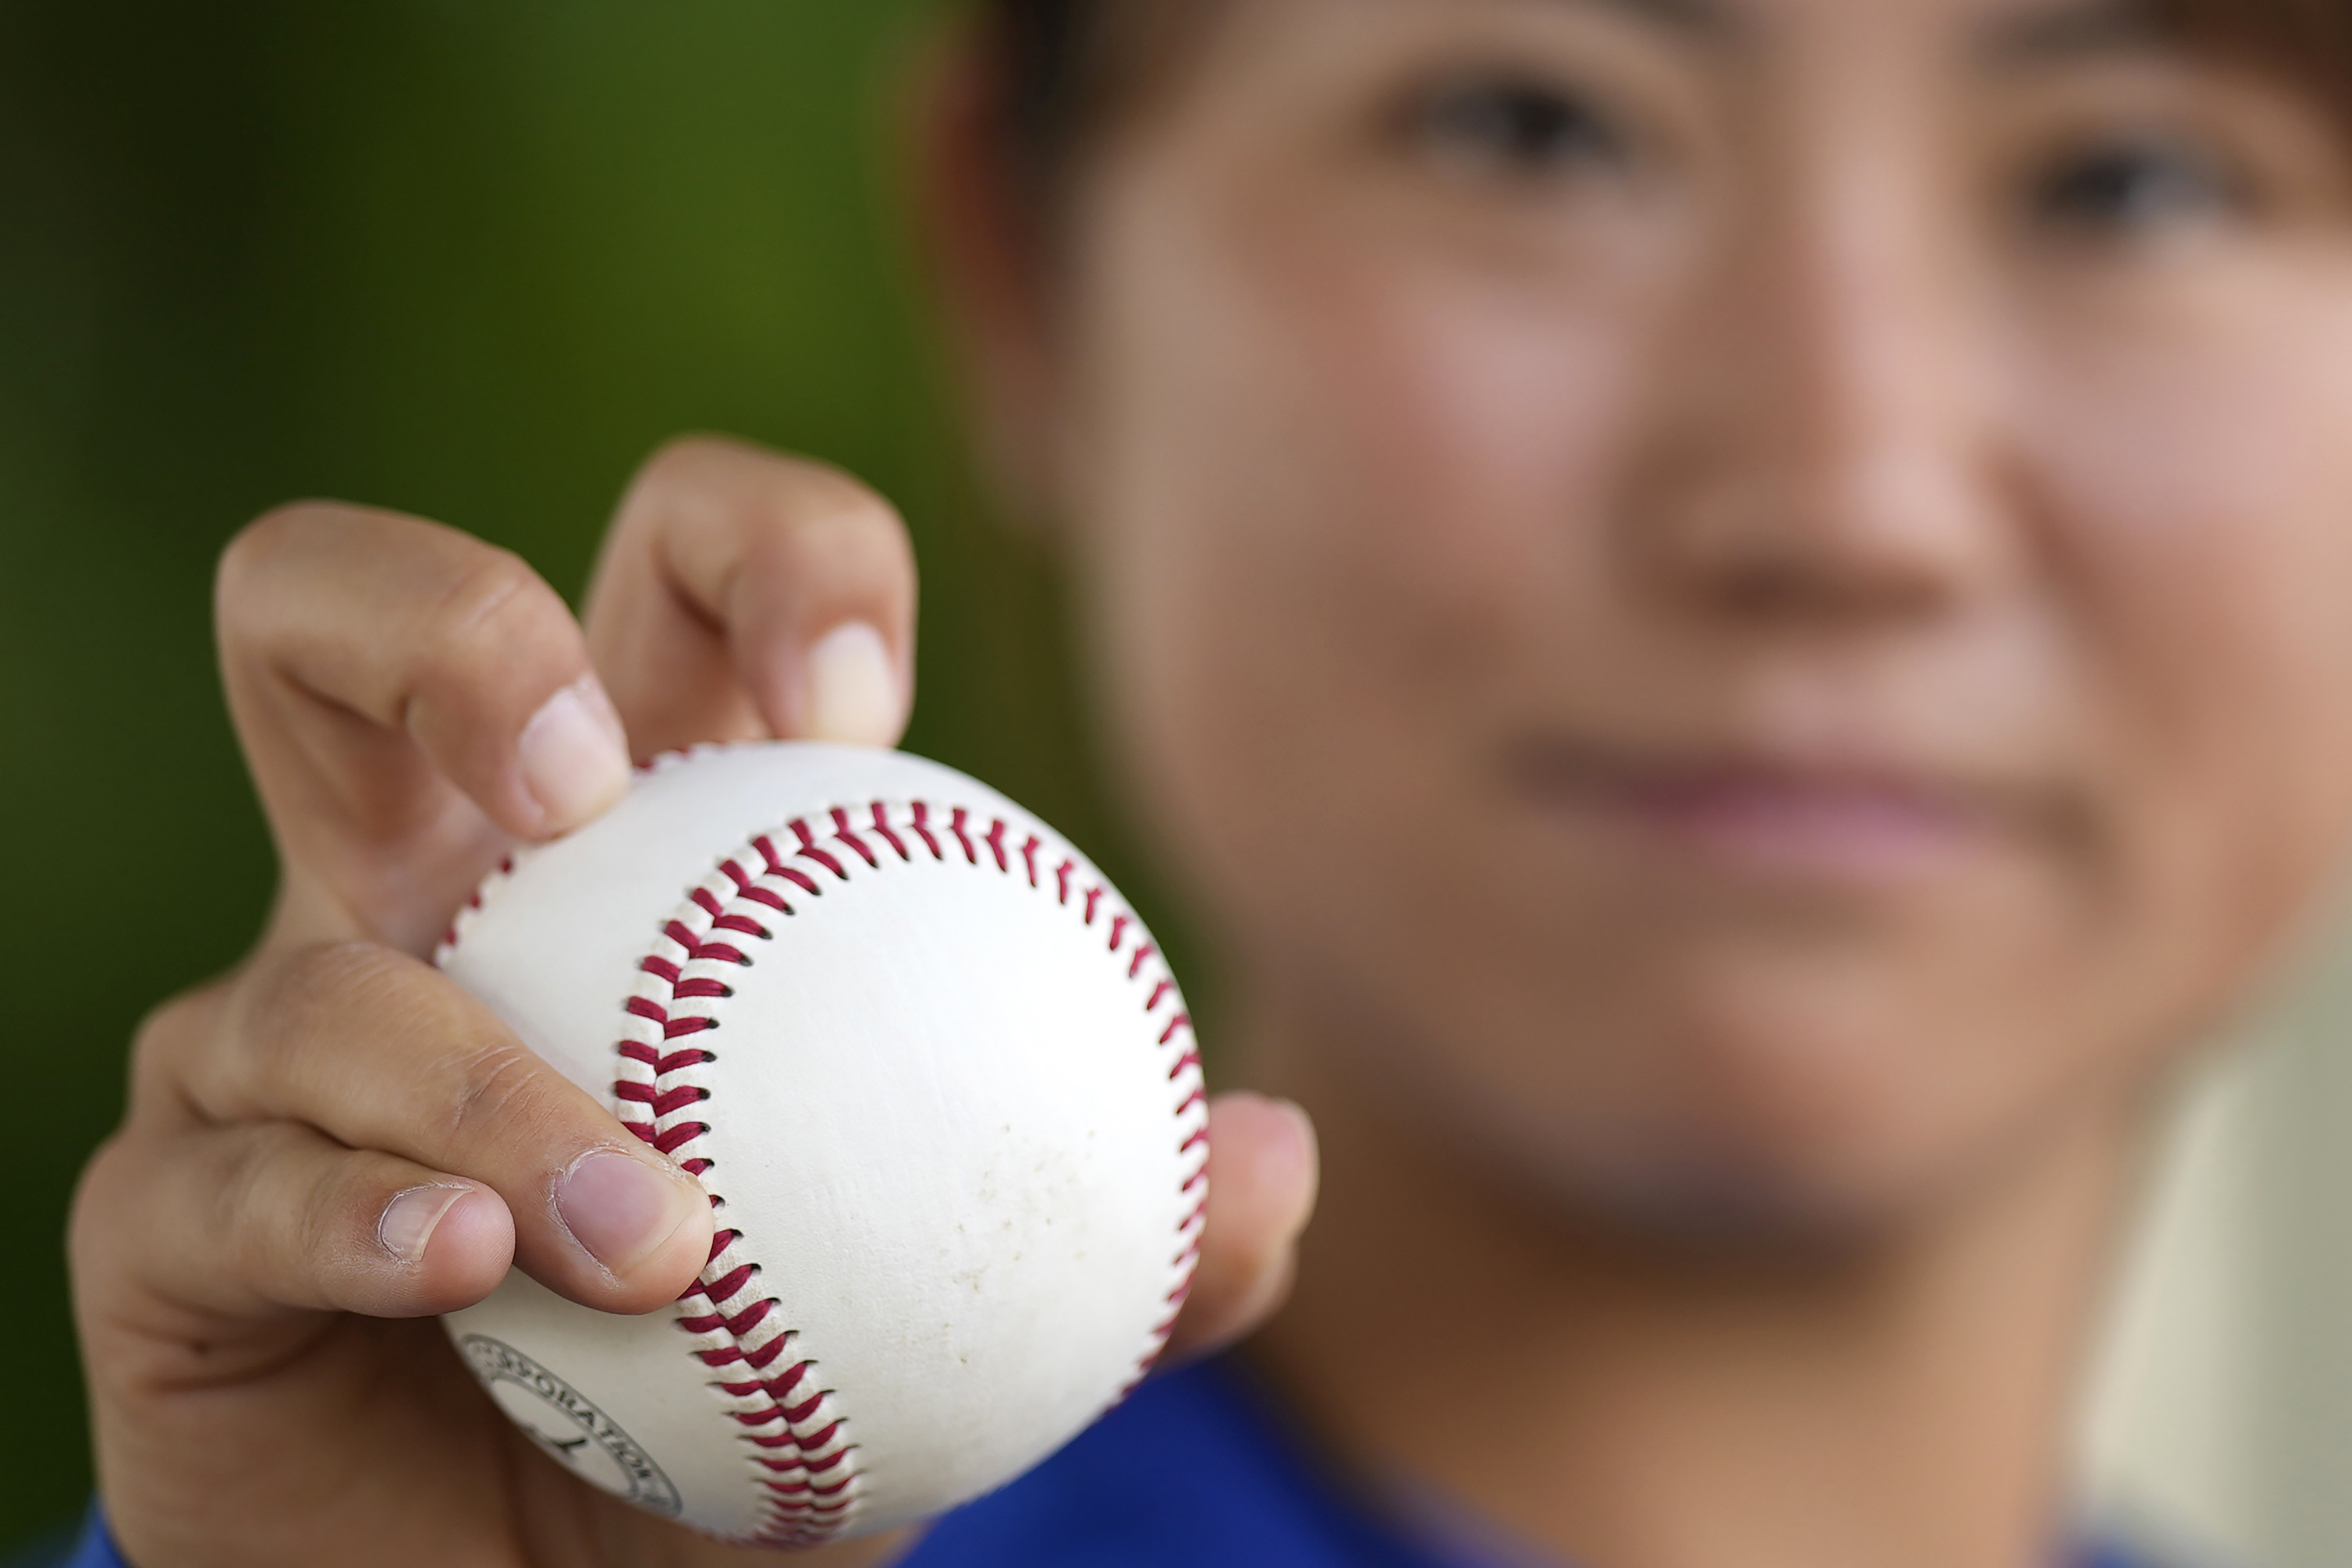 Japanese knuckleball pitcher Eri Yoshida plays on her own 'Field of Dreams